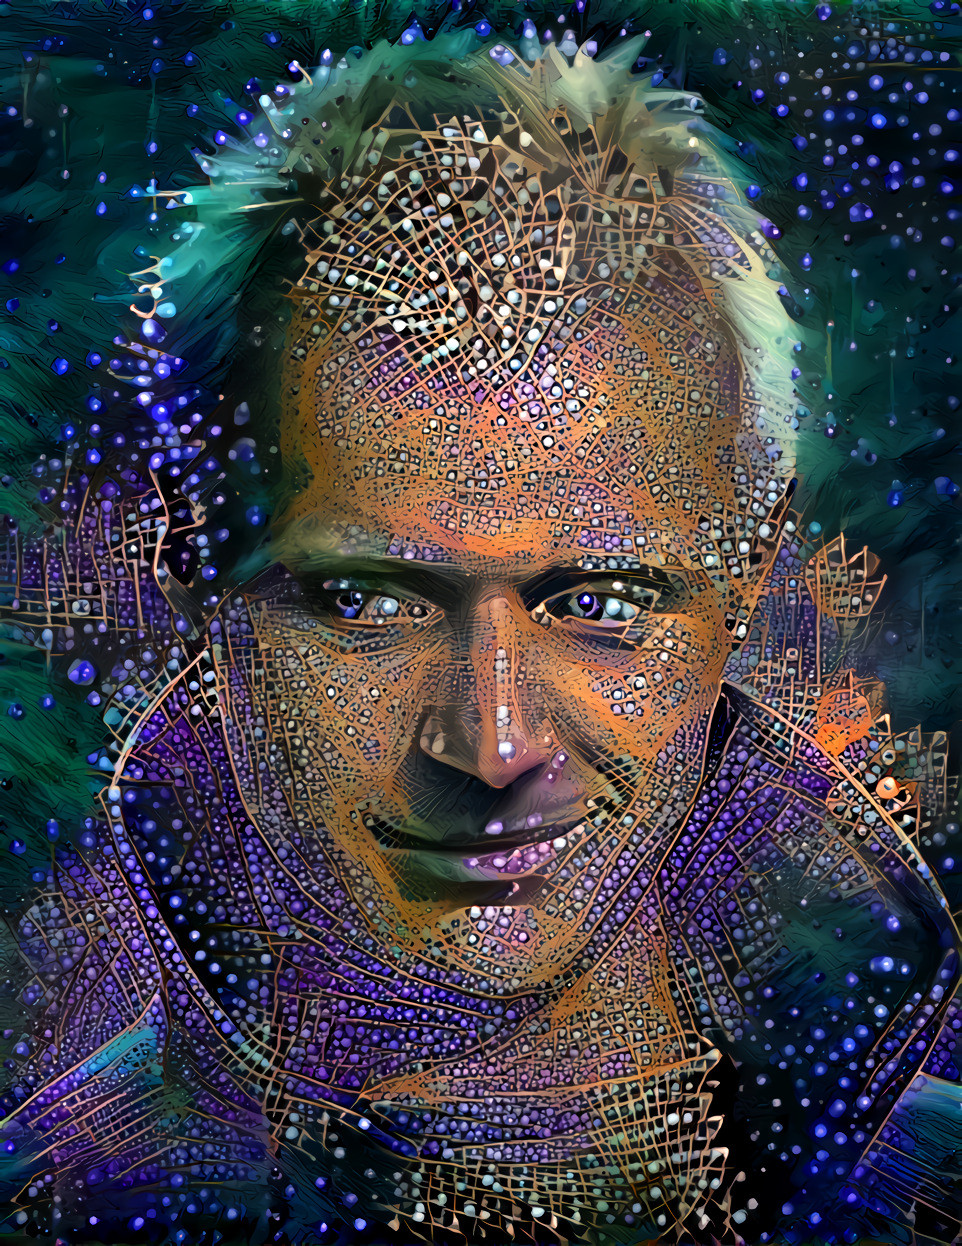 Our twinkling star.....Rutger Hauer.